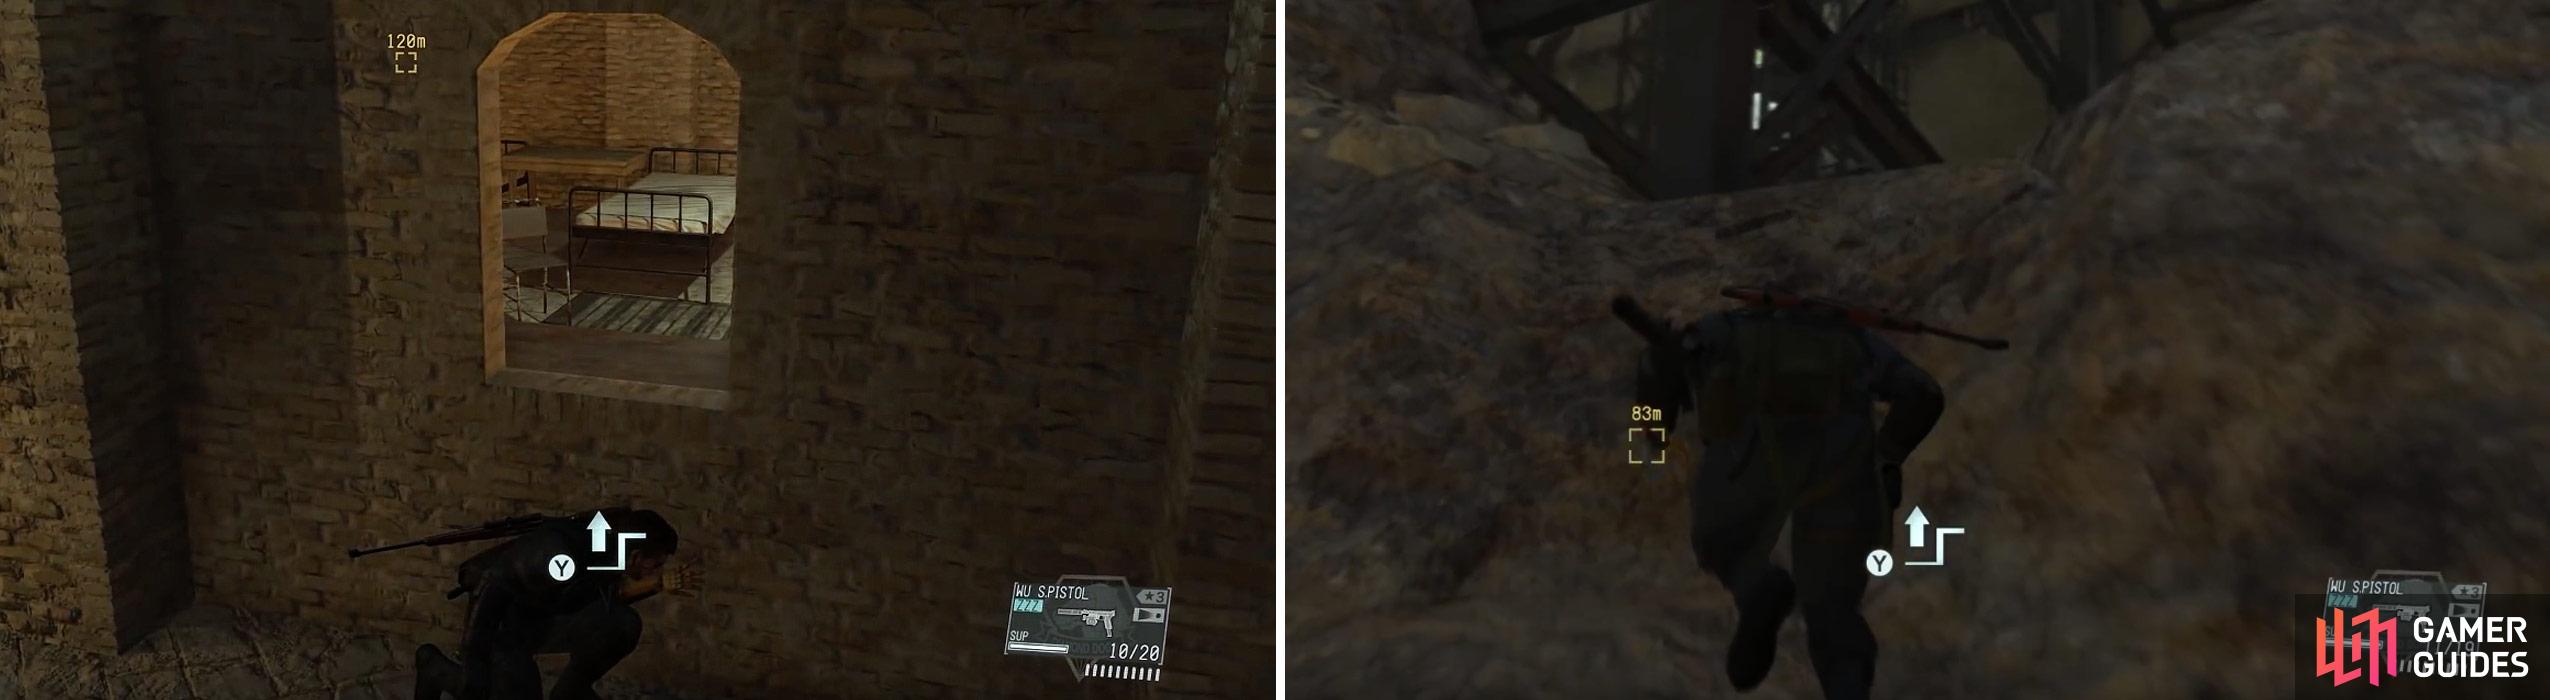 You can also sneak to the helipad by cilmbing through this window (left) and sneaking up to the gantry level through the hole in the wall (right).